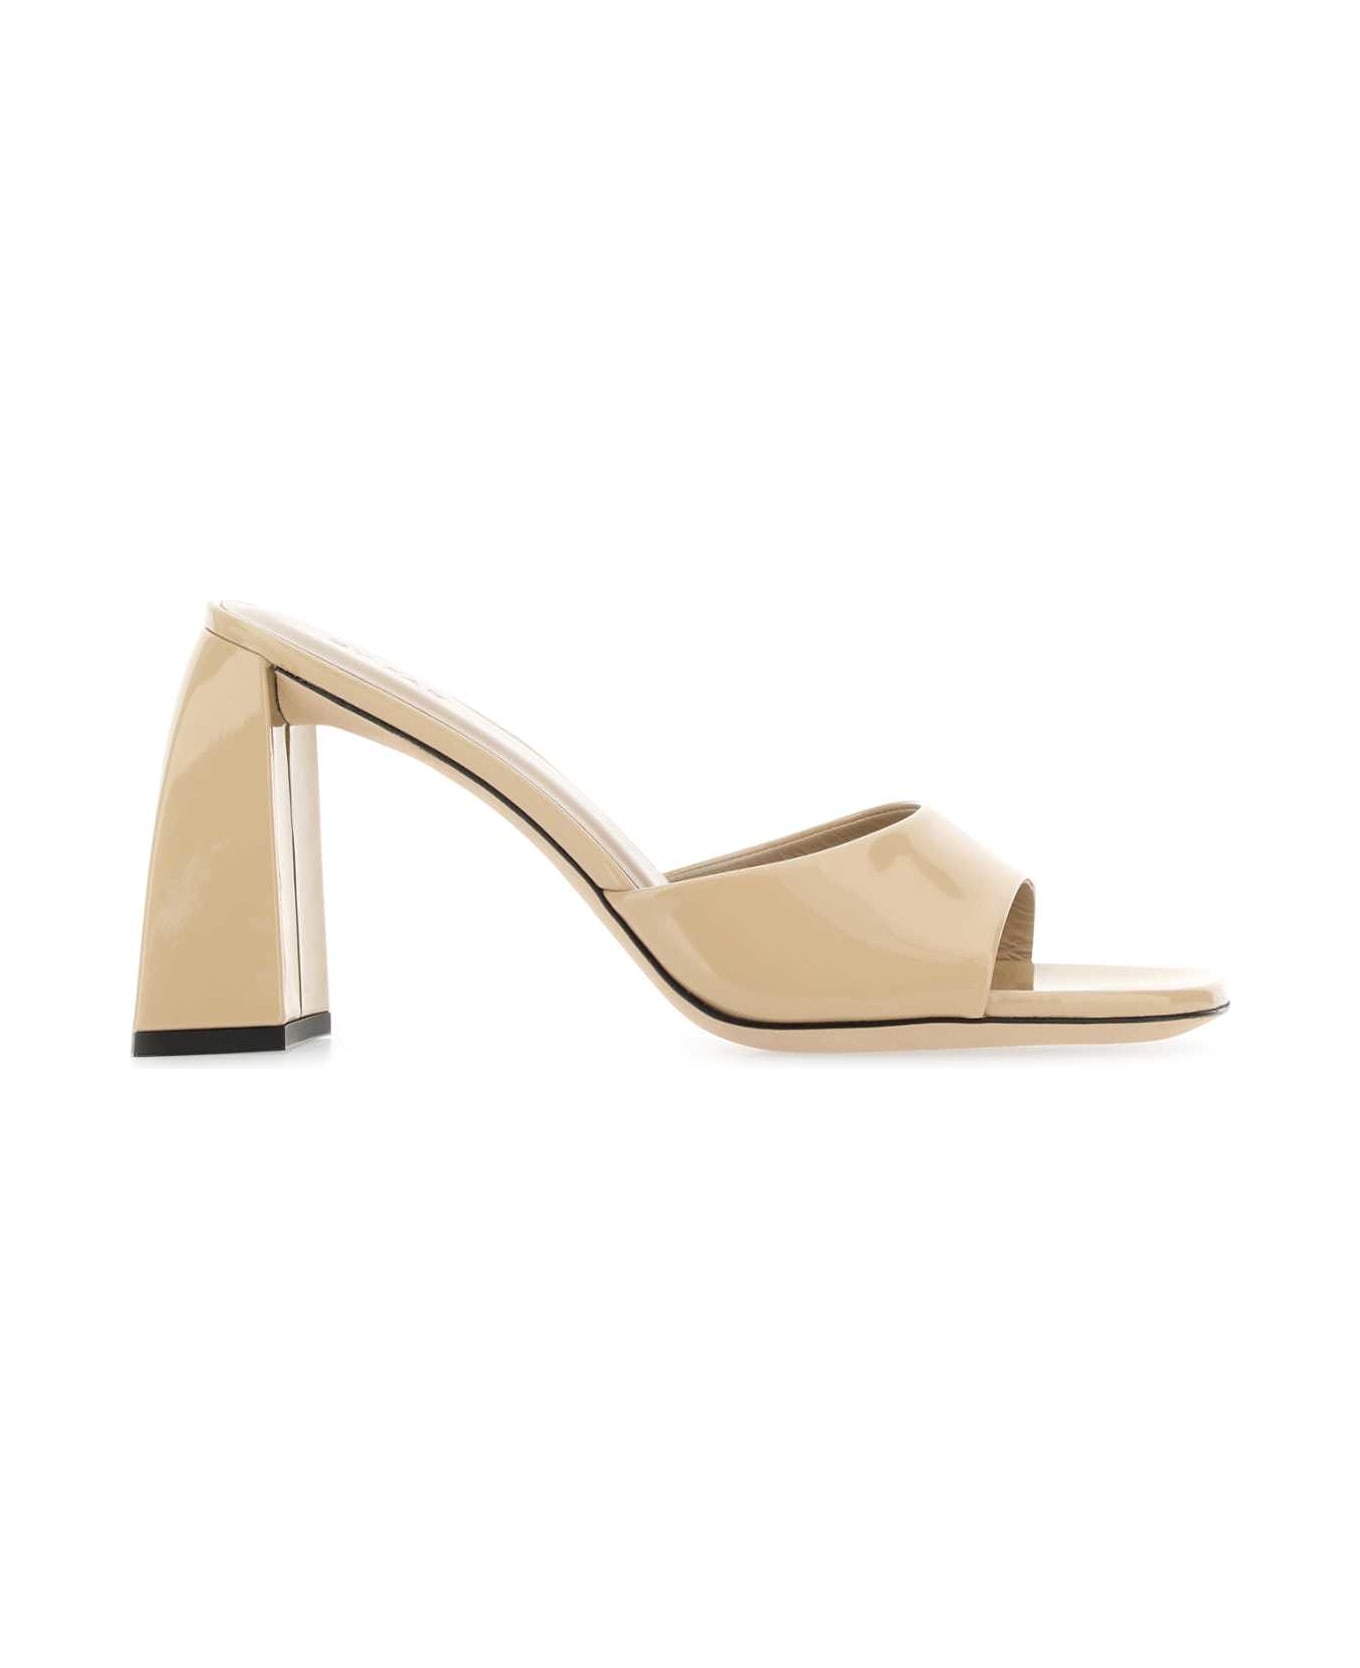 BY FAR Sand Leather Michele Mules - Beige